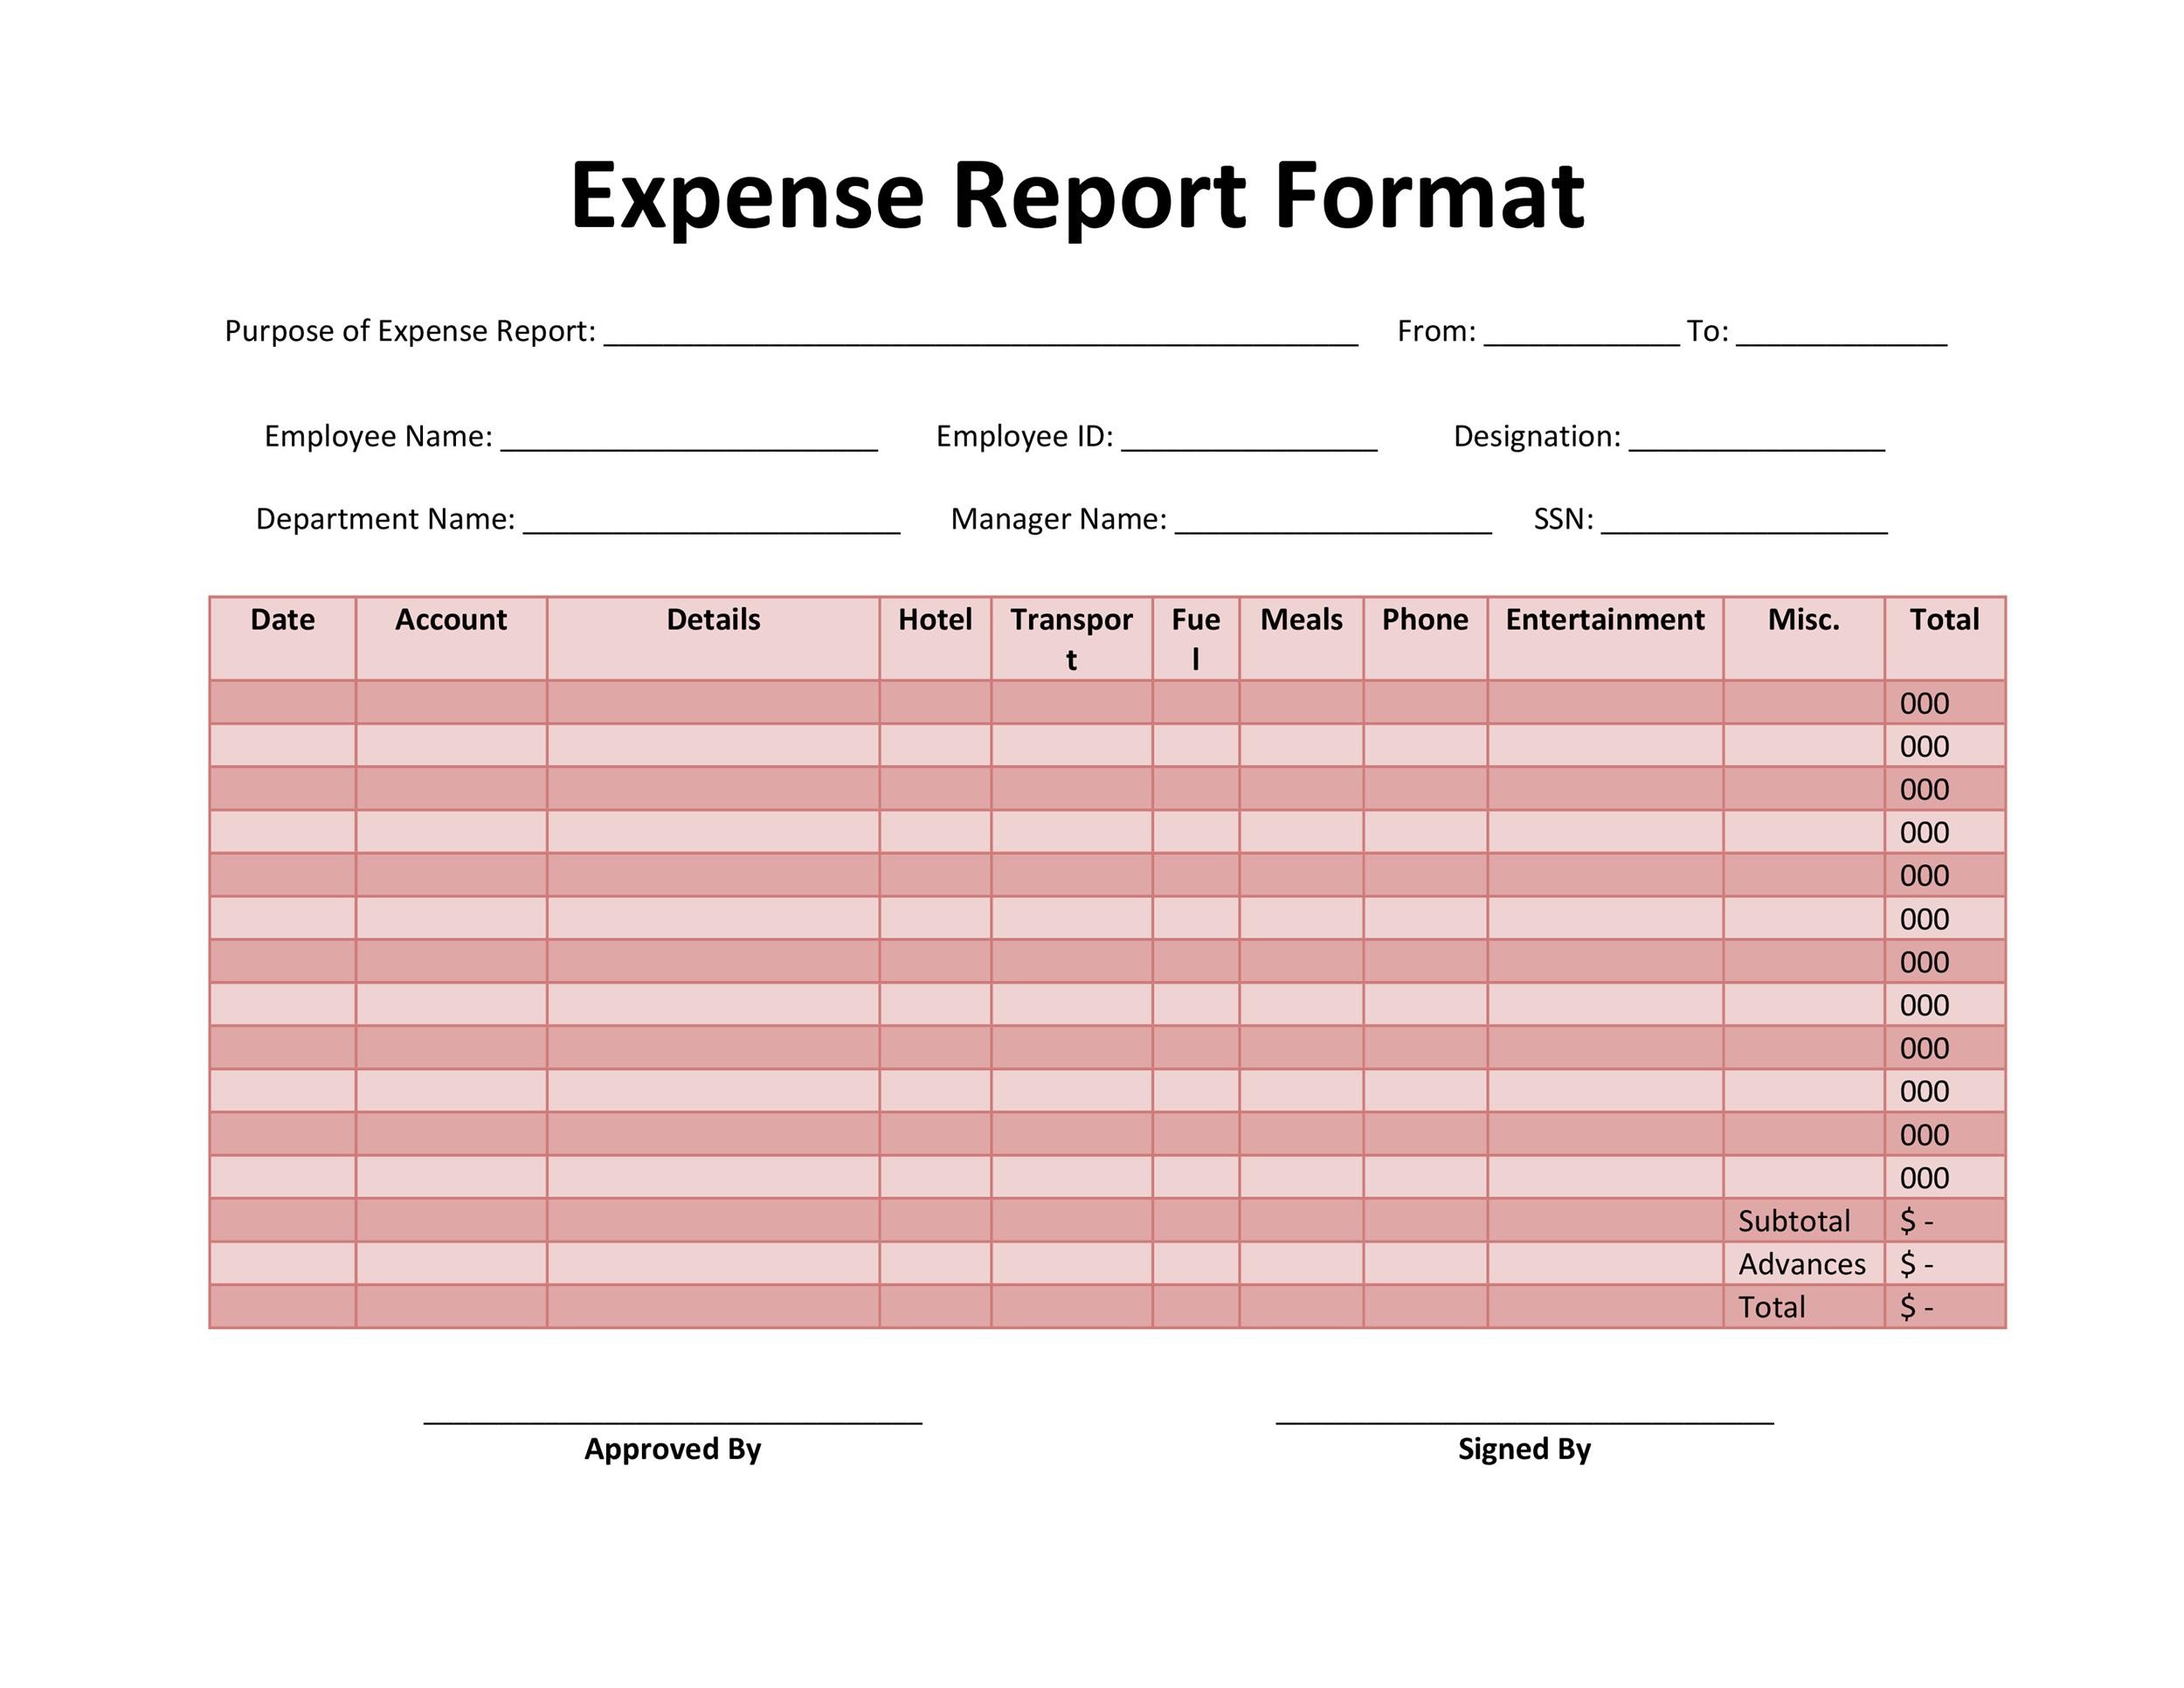 40+ Expense Report Templates to Help you Save Money - Template Lab